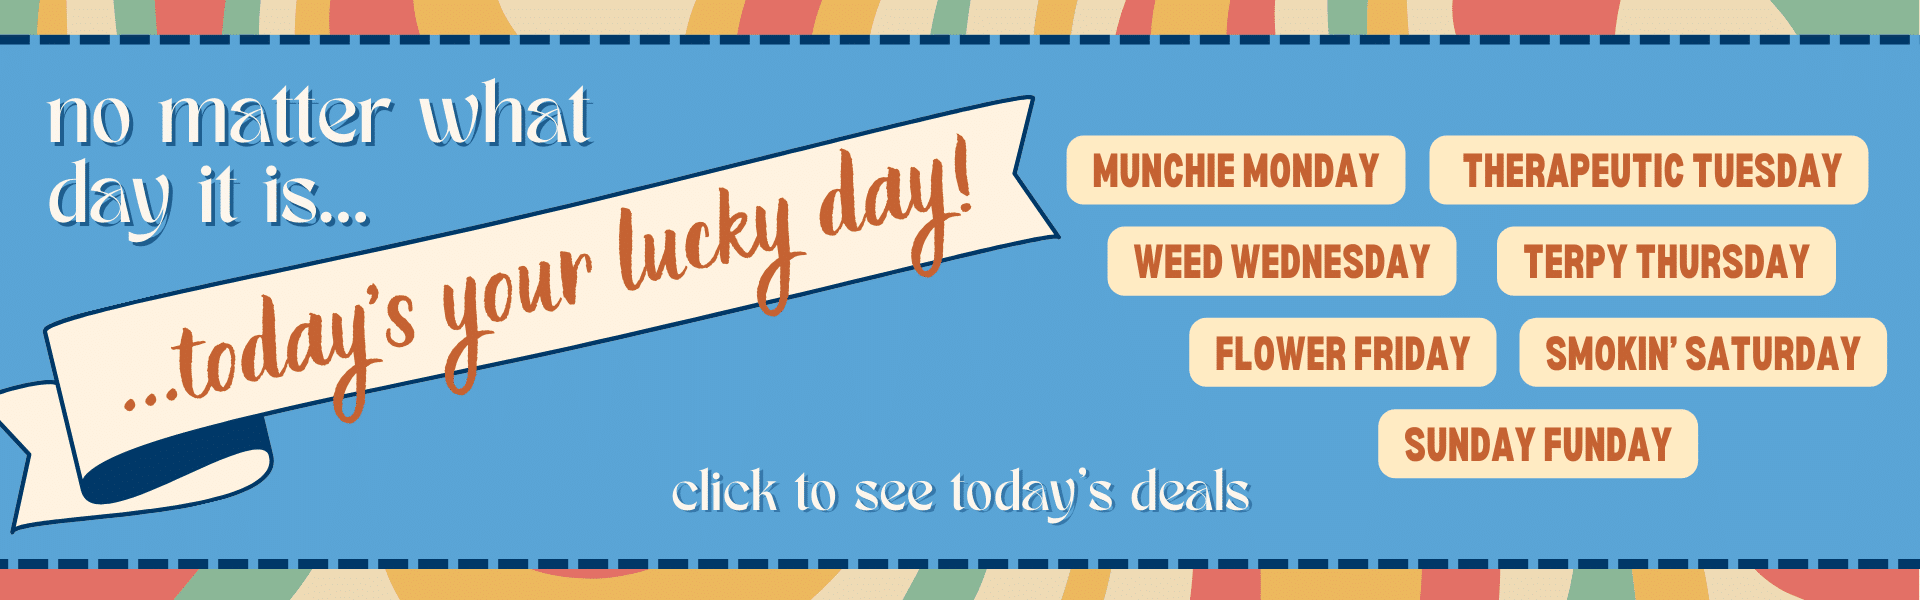 Abstract retro graphic with text that reads: No matter what day it is, today's your lucky day. Munchie Monday, Therapeutic Tuesday, Weed Wednesday, Terpy Thursday, Flower Friday, Smokin' Saturday, Sunday Funday. Click to see today's deals.